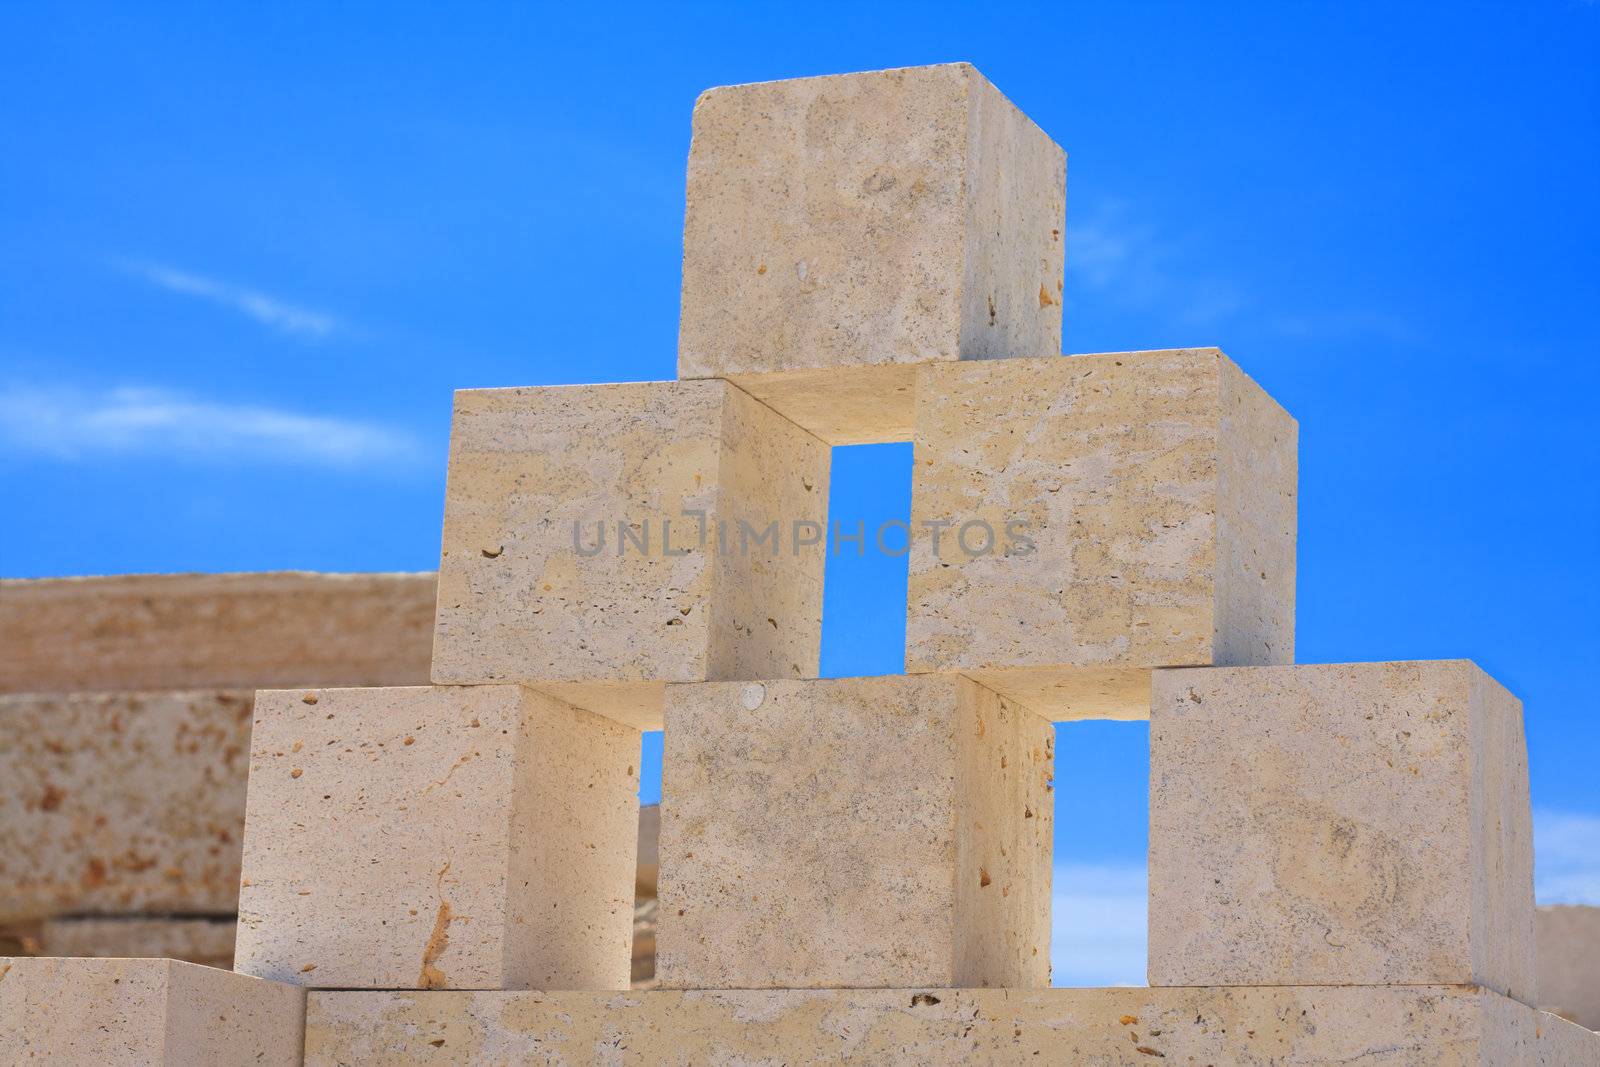 blocks of limestone processed and ready for use, are against the blue sky